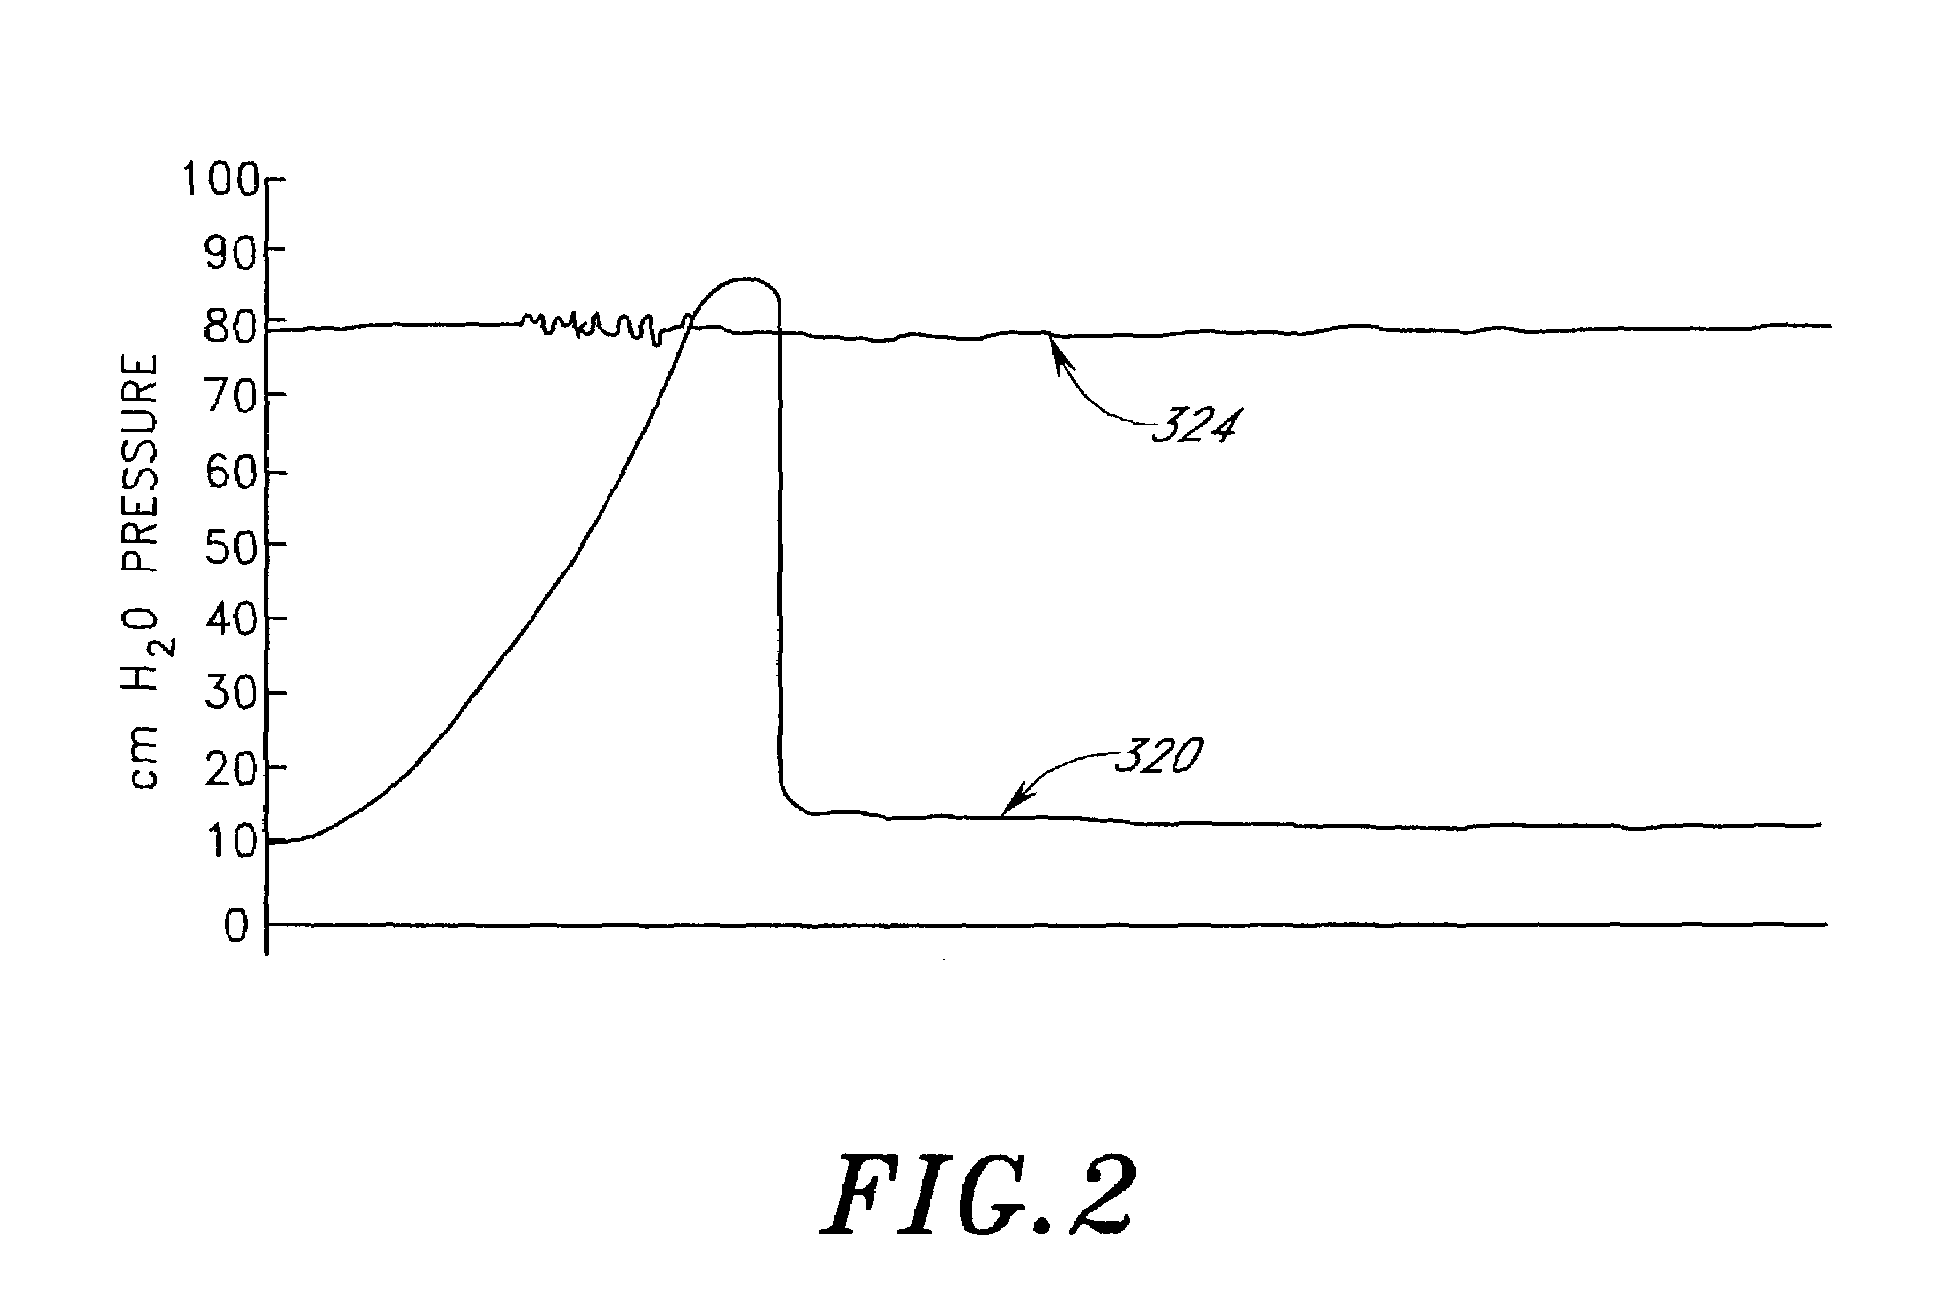 Treatment of patients with a compressible attenuation device